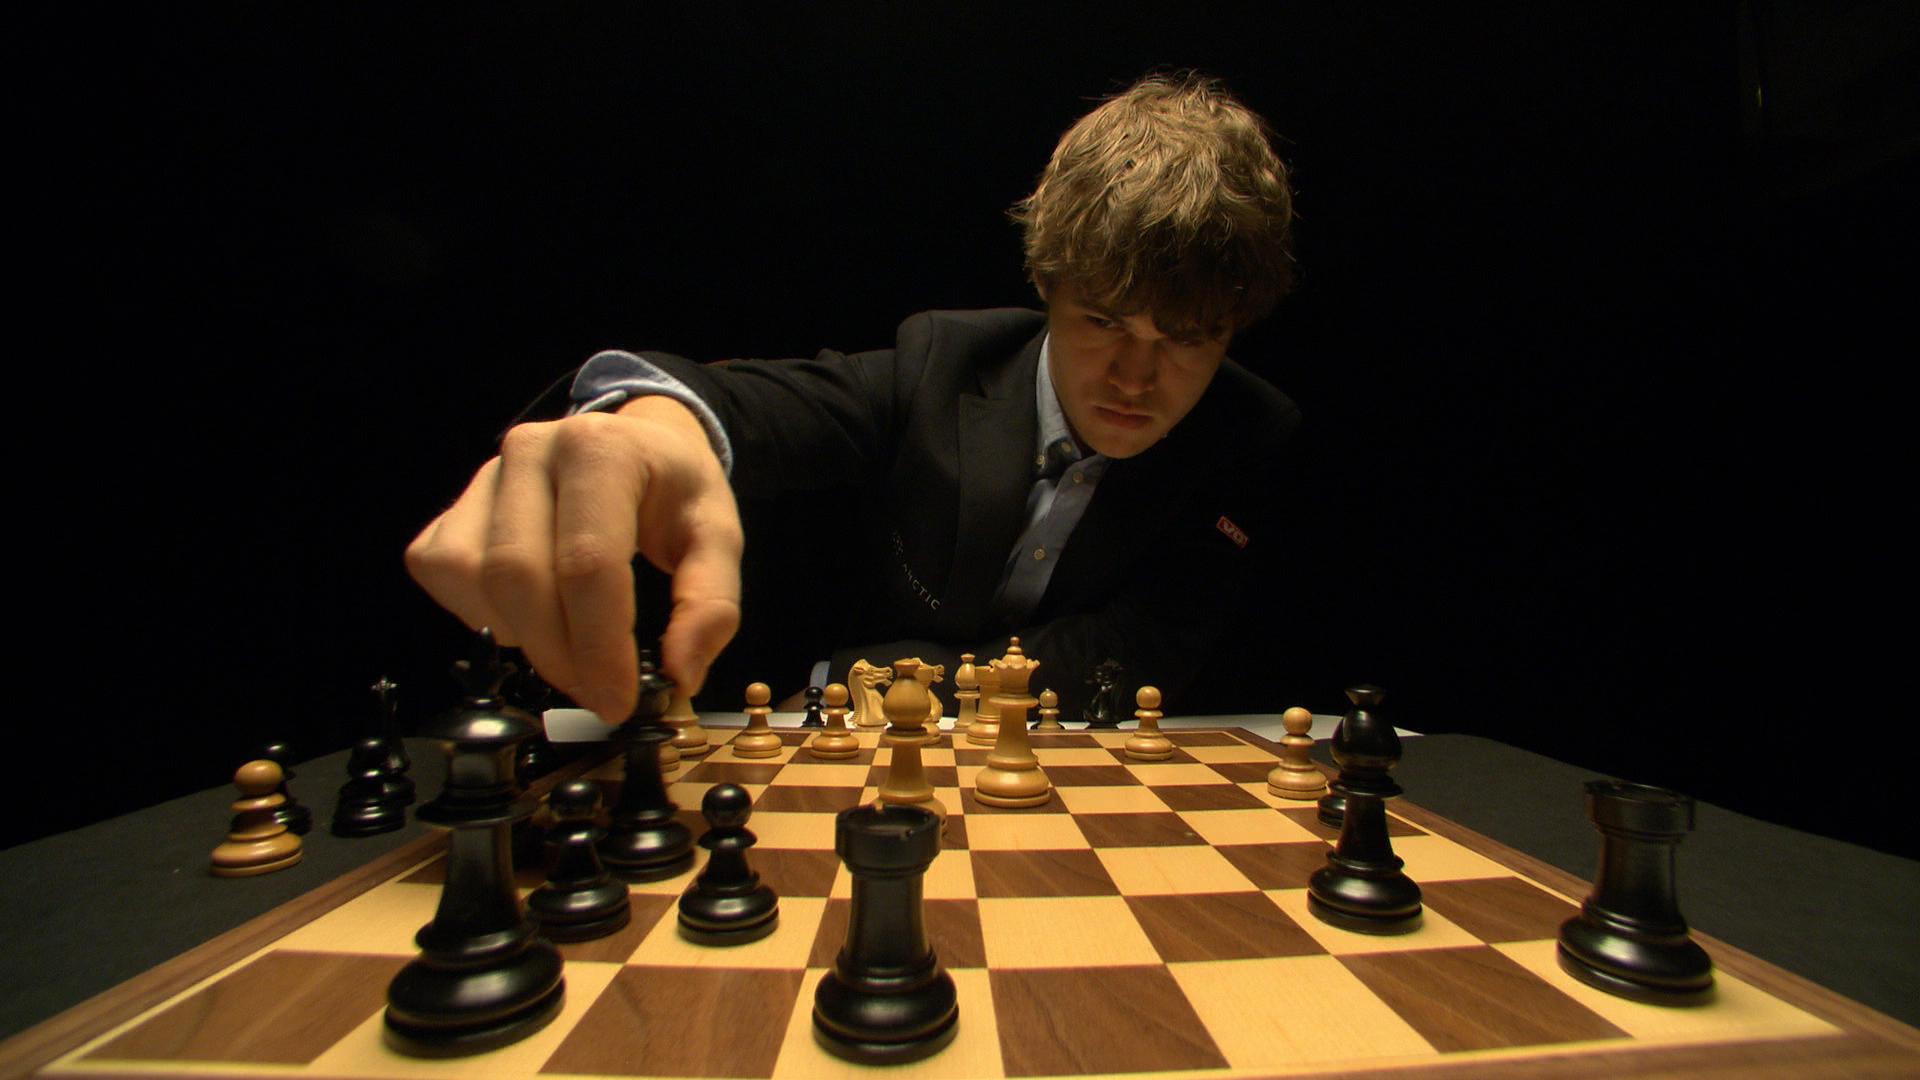 How to obtain international master title in chess? a step by step guide